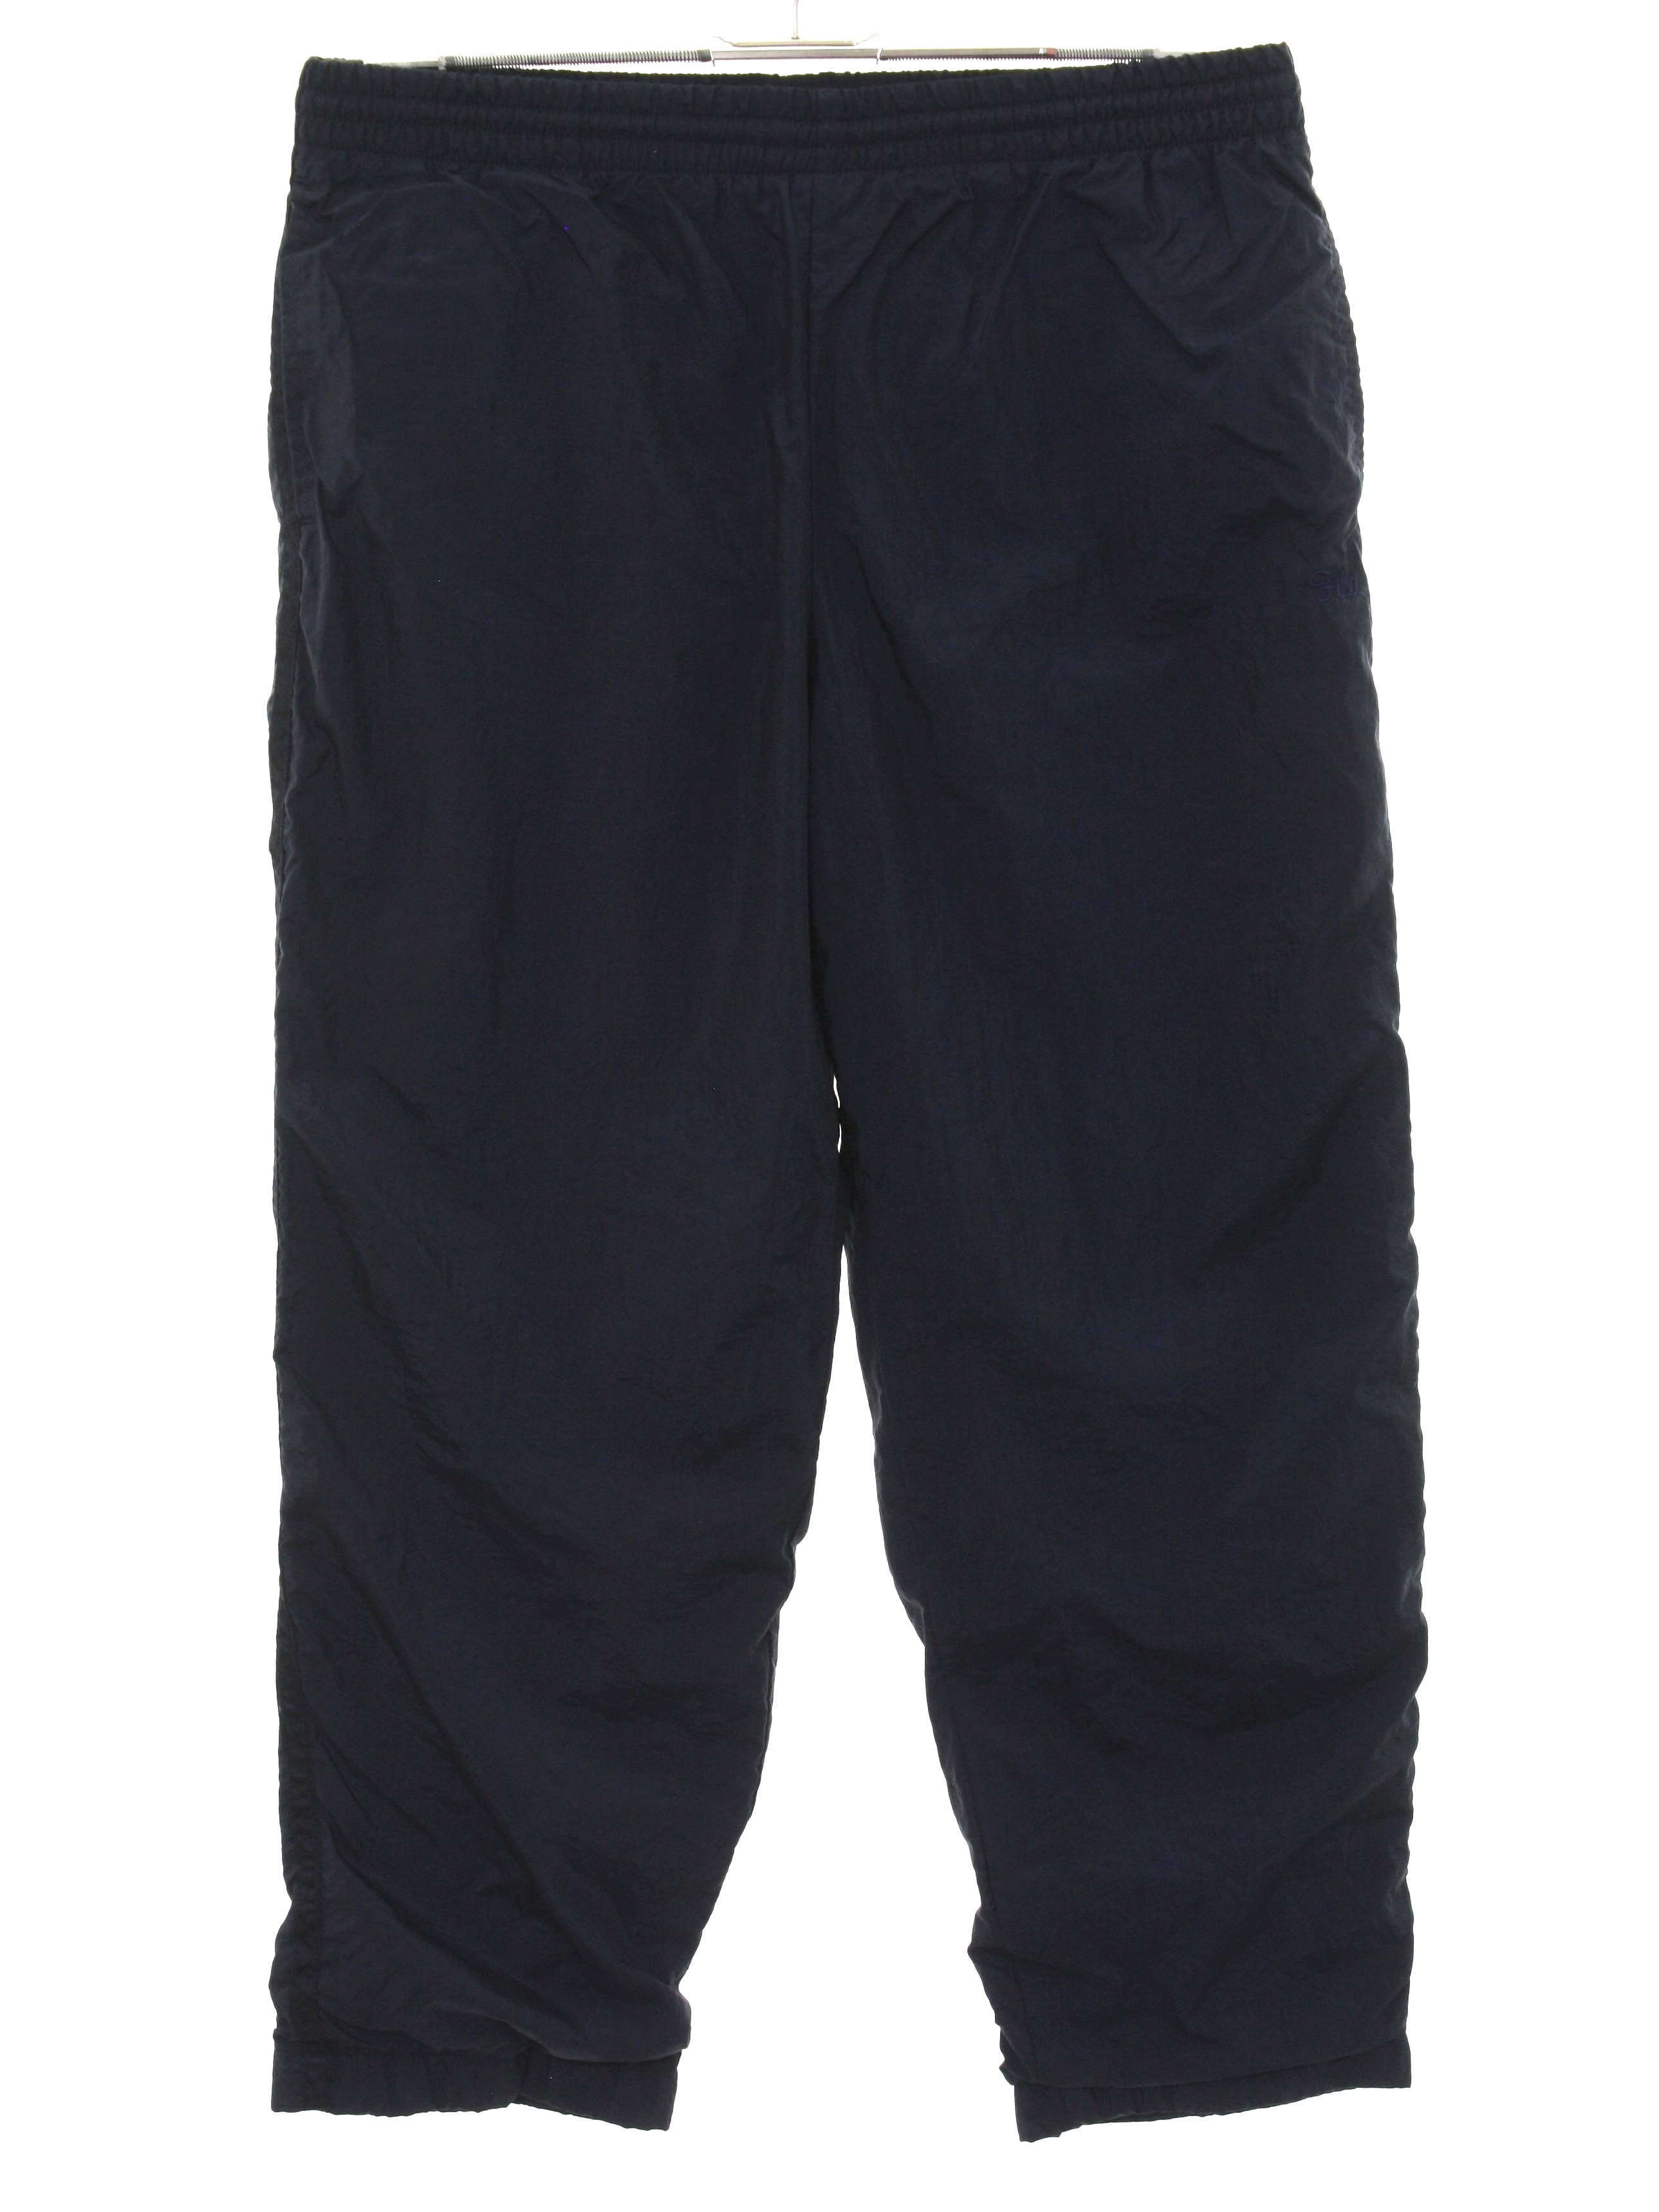 Pants: 90s -Fila- Womens midnight blue solid colored nylon flat front ...